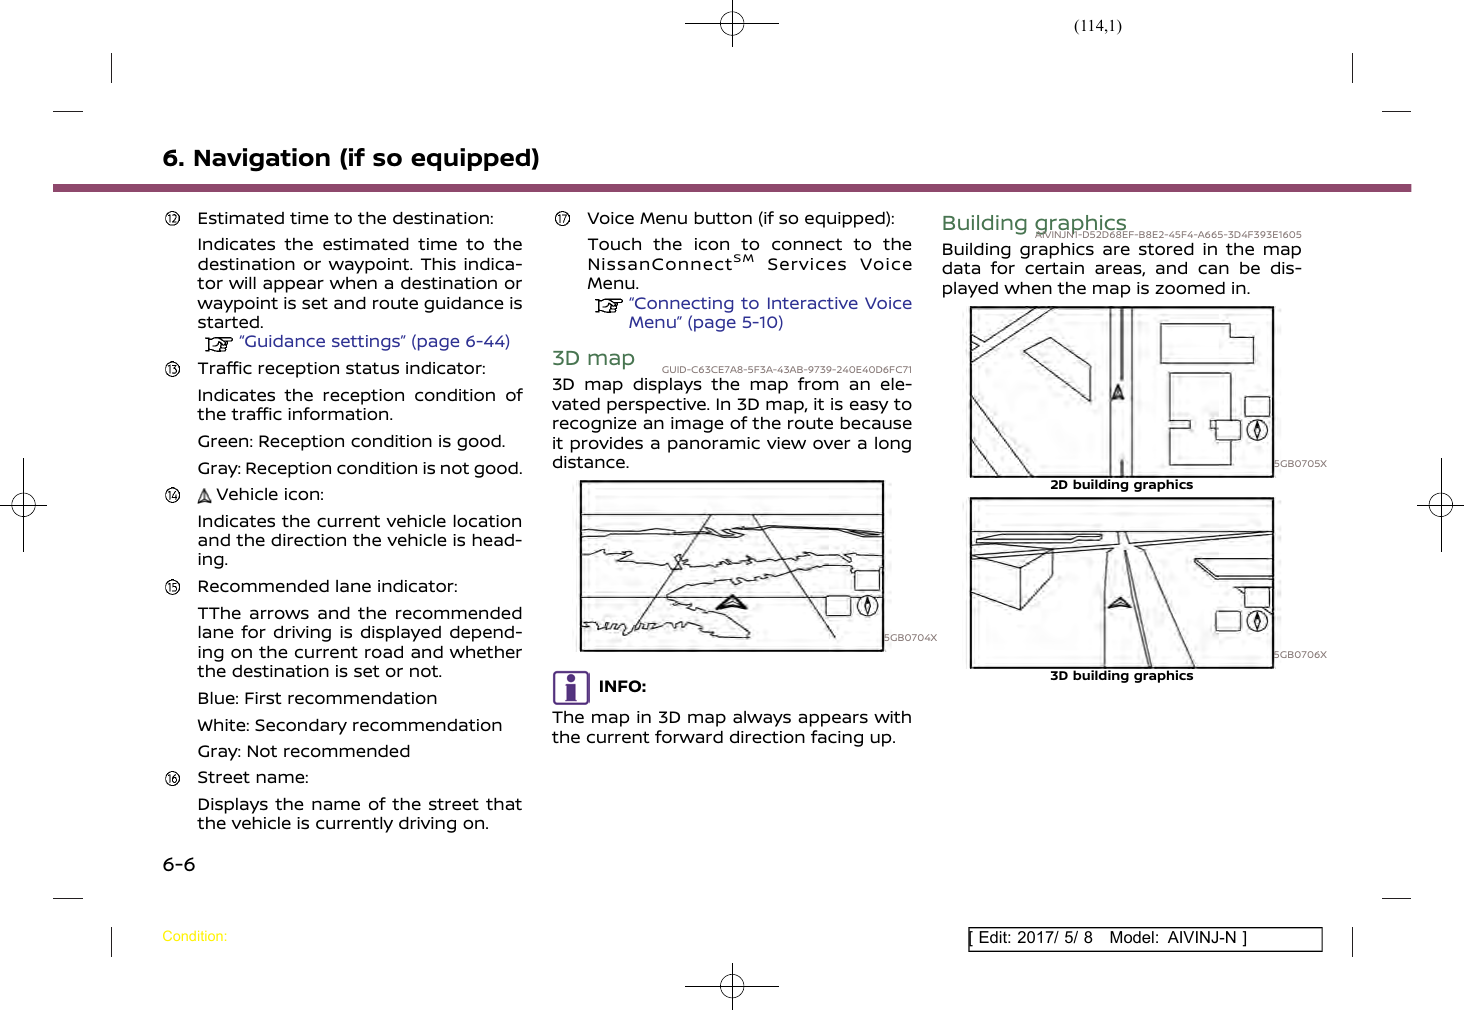 Page 114 of Robert Bosch Car Multimedia AIVICMFB0 Navigation System with Bluetooth and WLAN User Manual